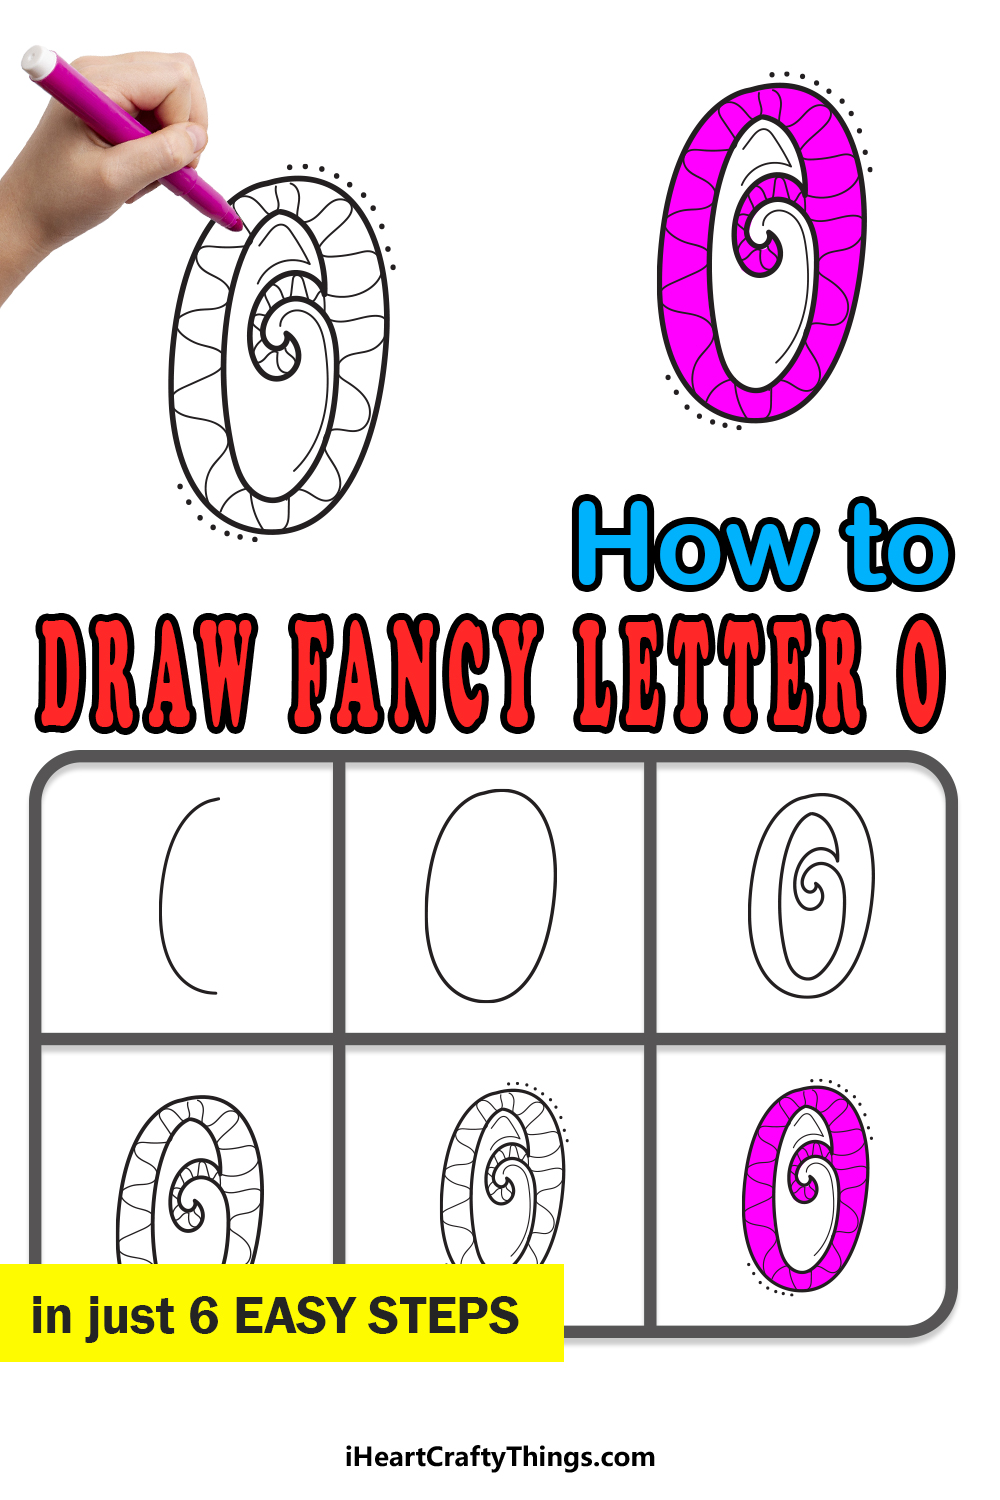 How To Draw Your Own Fancy O step by step guide